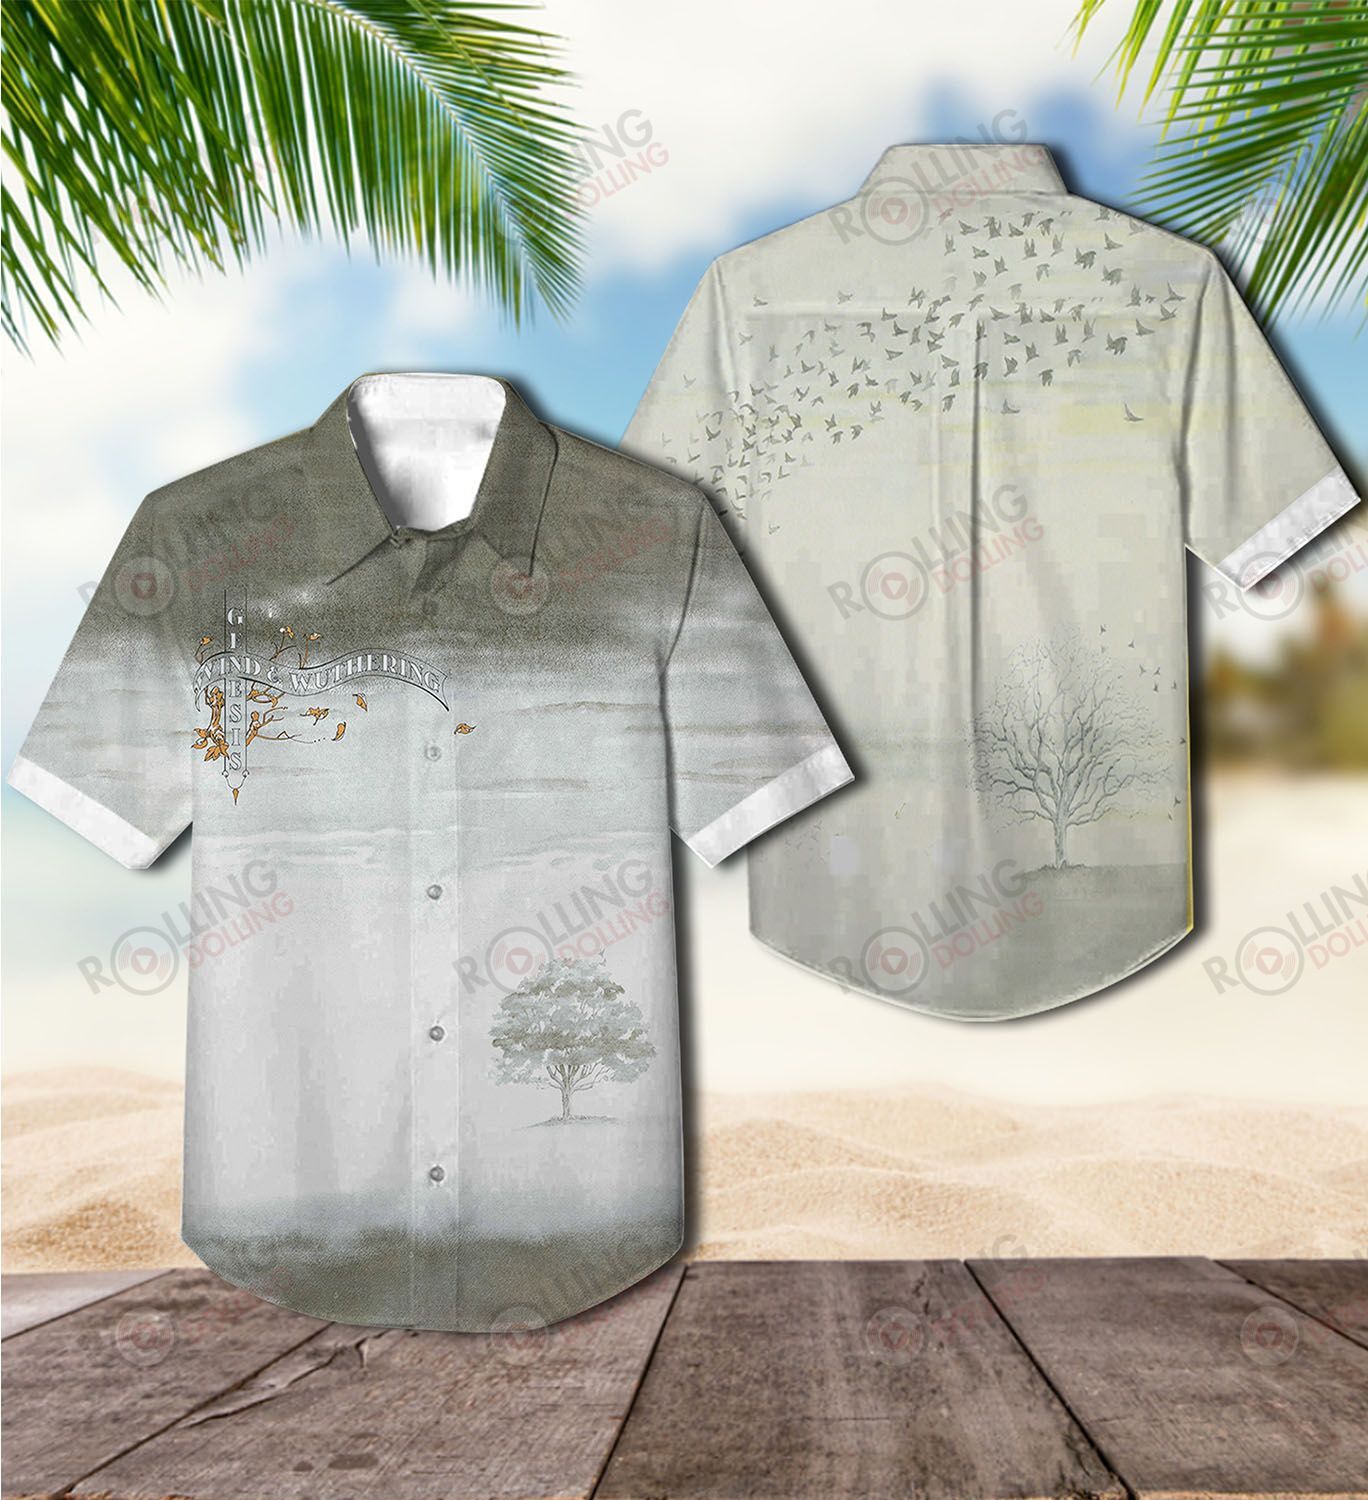 The Hawaiian Shirt is a popular shirt that is worn by Rock band fans 80